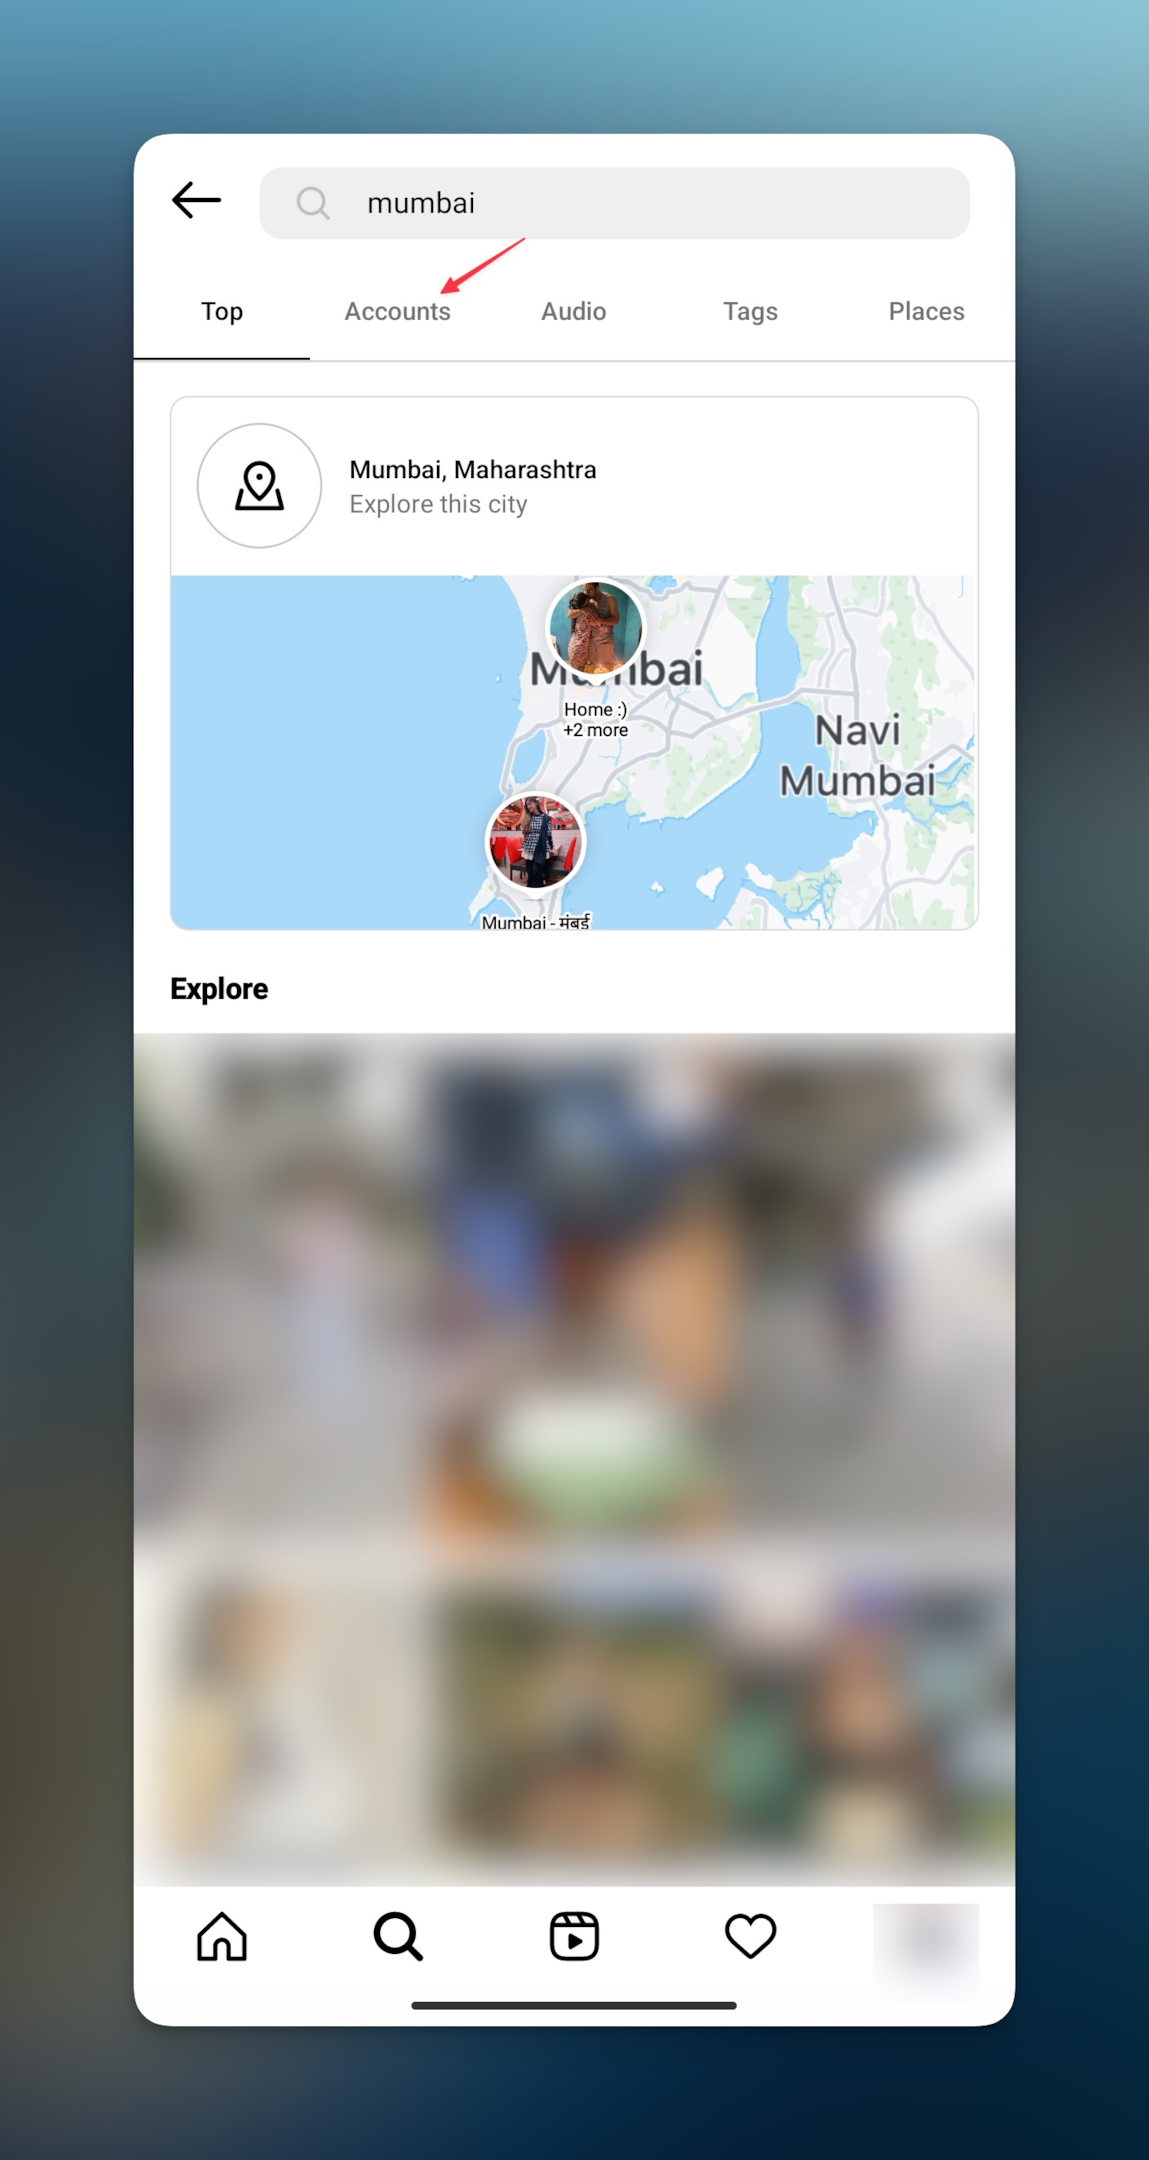 Remote.tools shows the search results for the search term on Instagram to follow someone